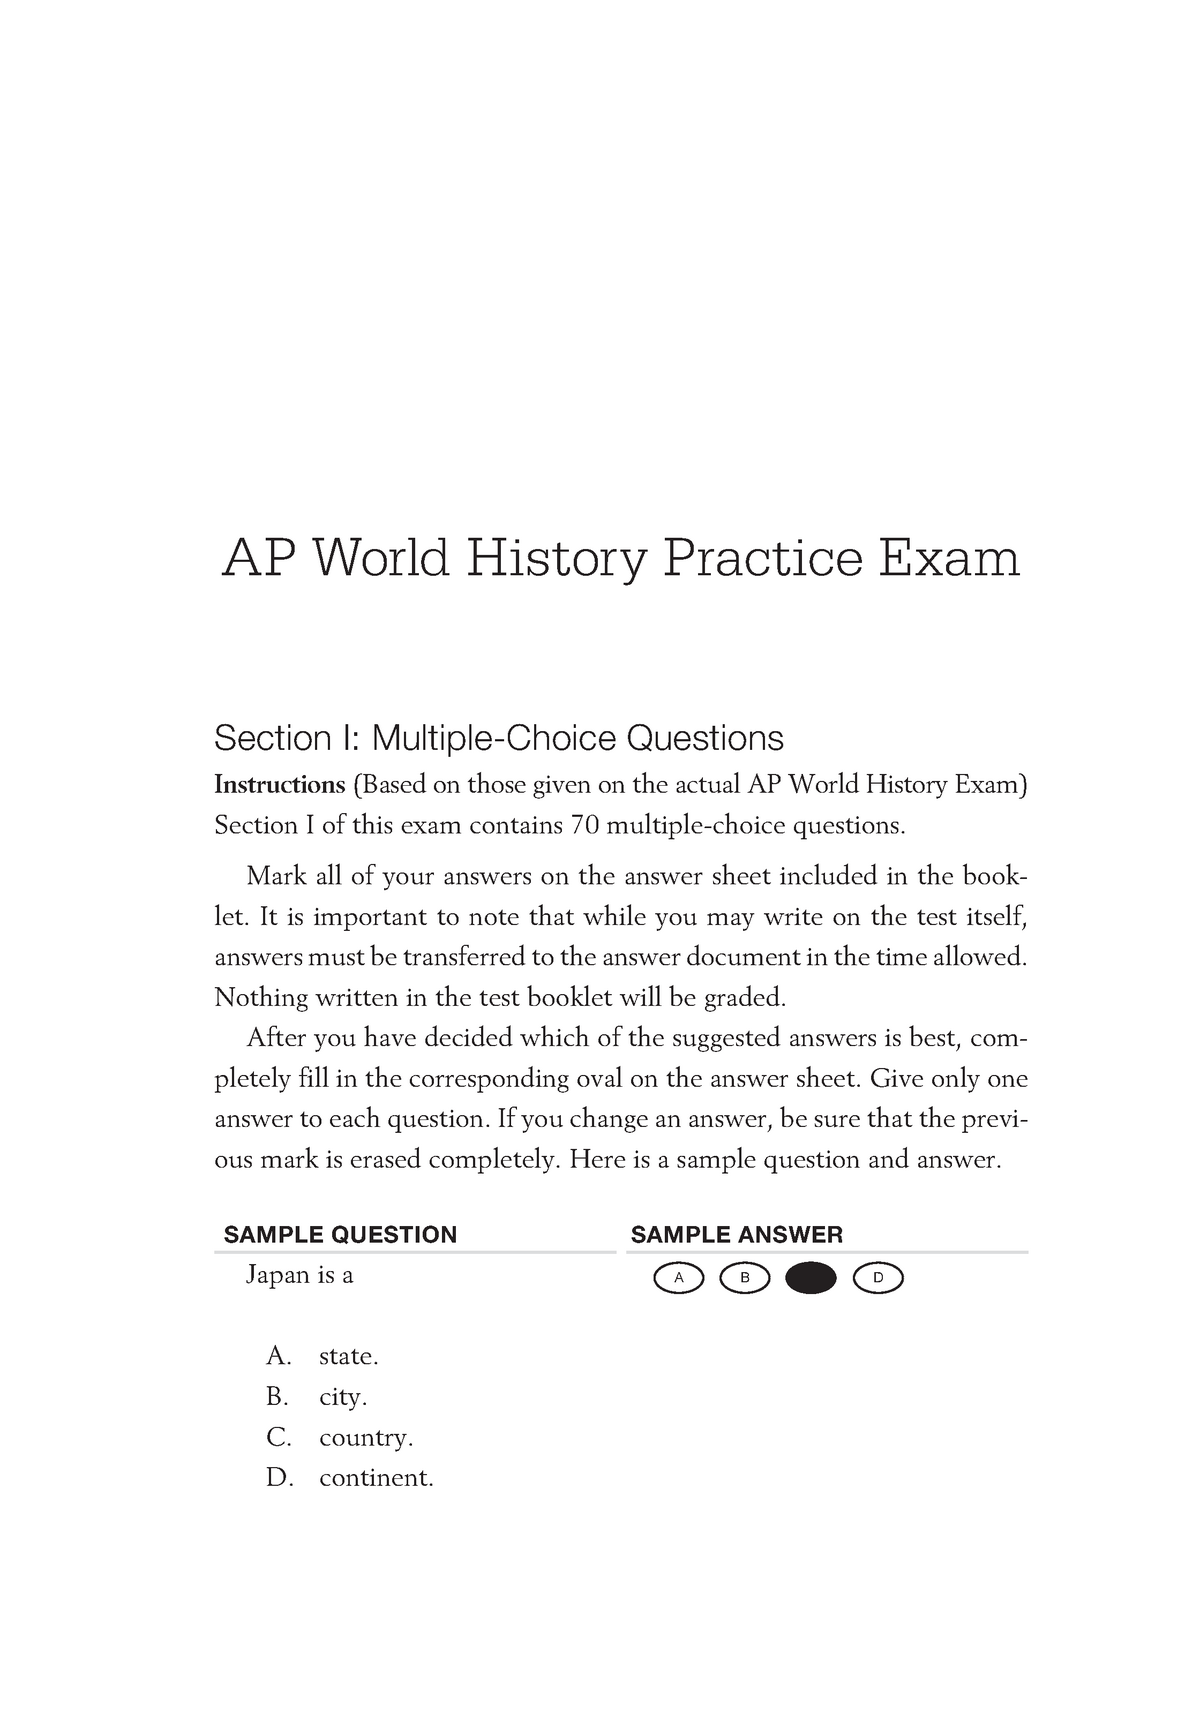 Apworldhist mult choice practice 4 possible answers instead of 5 AP